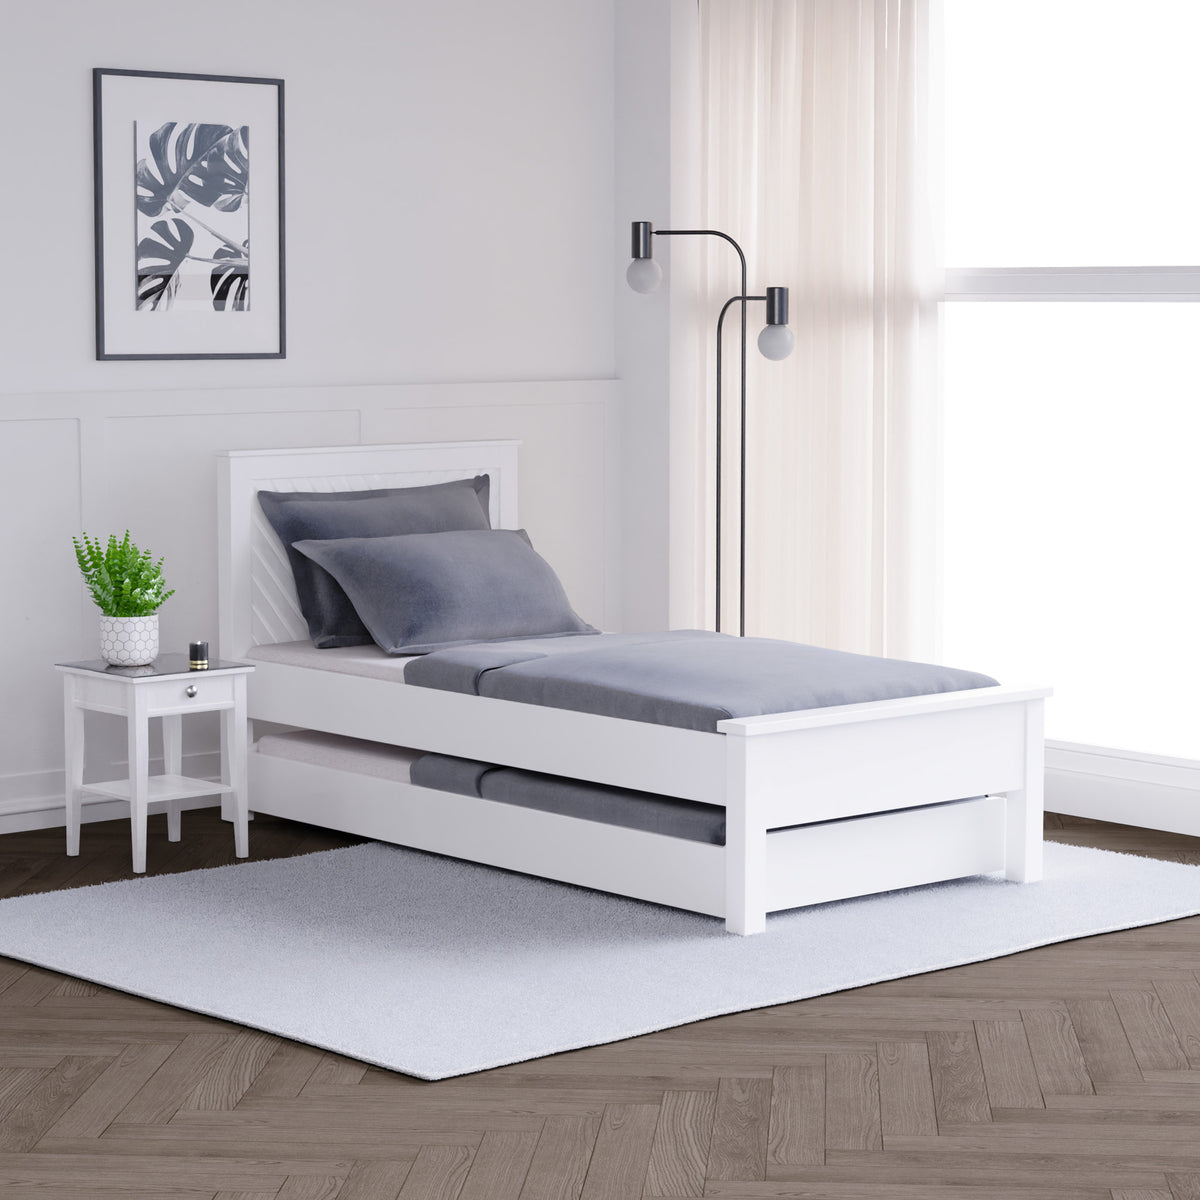 Wotton Chevron Guest Bed with Trundle